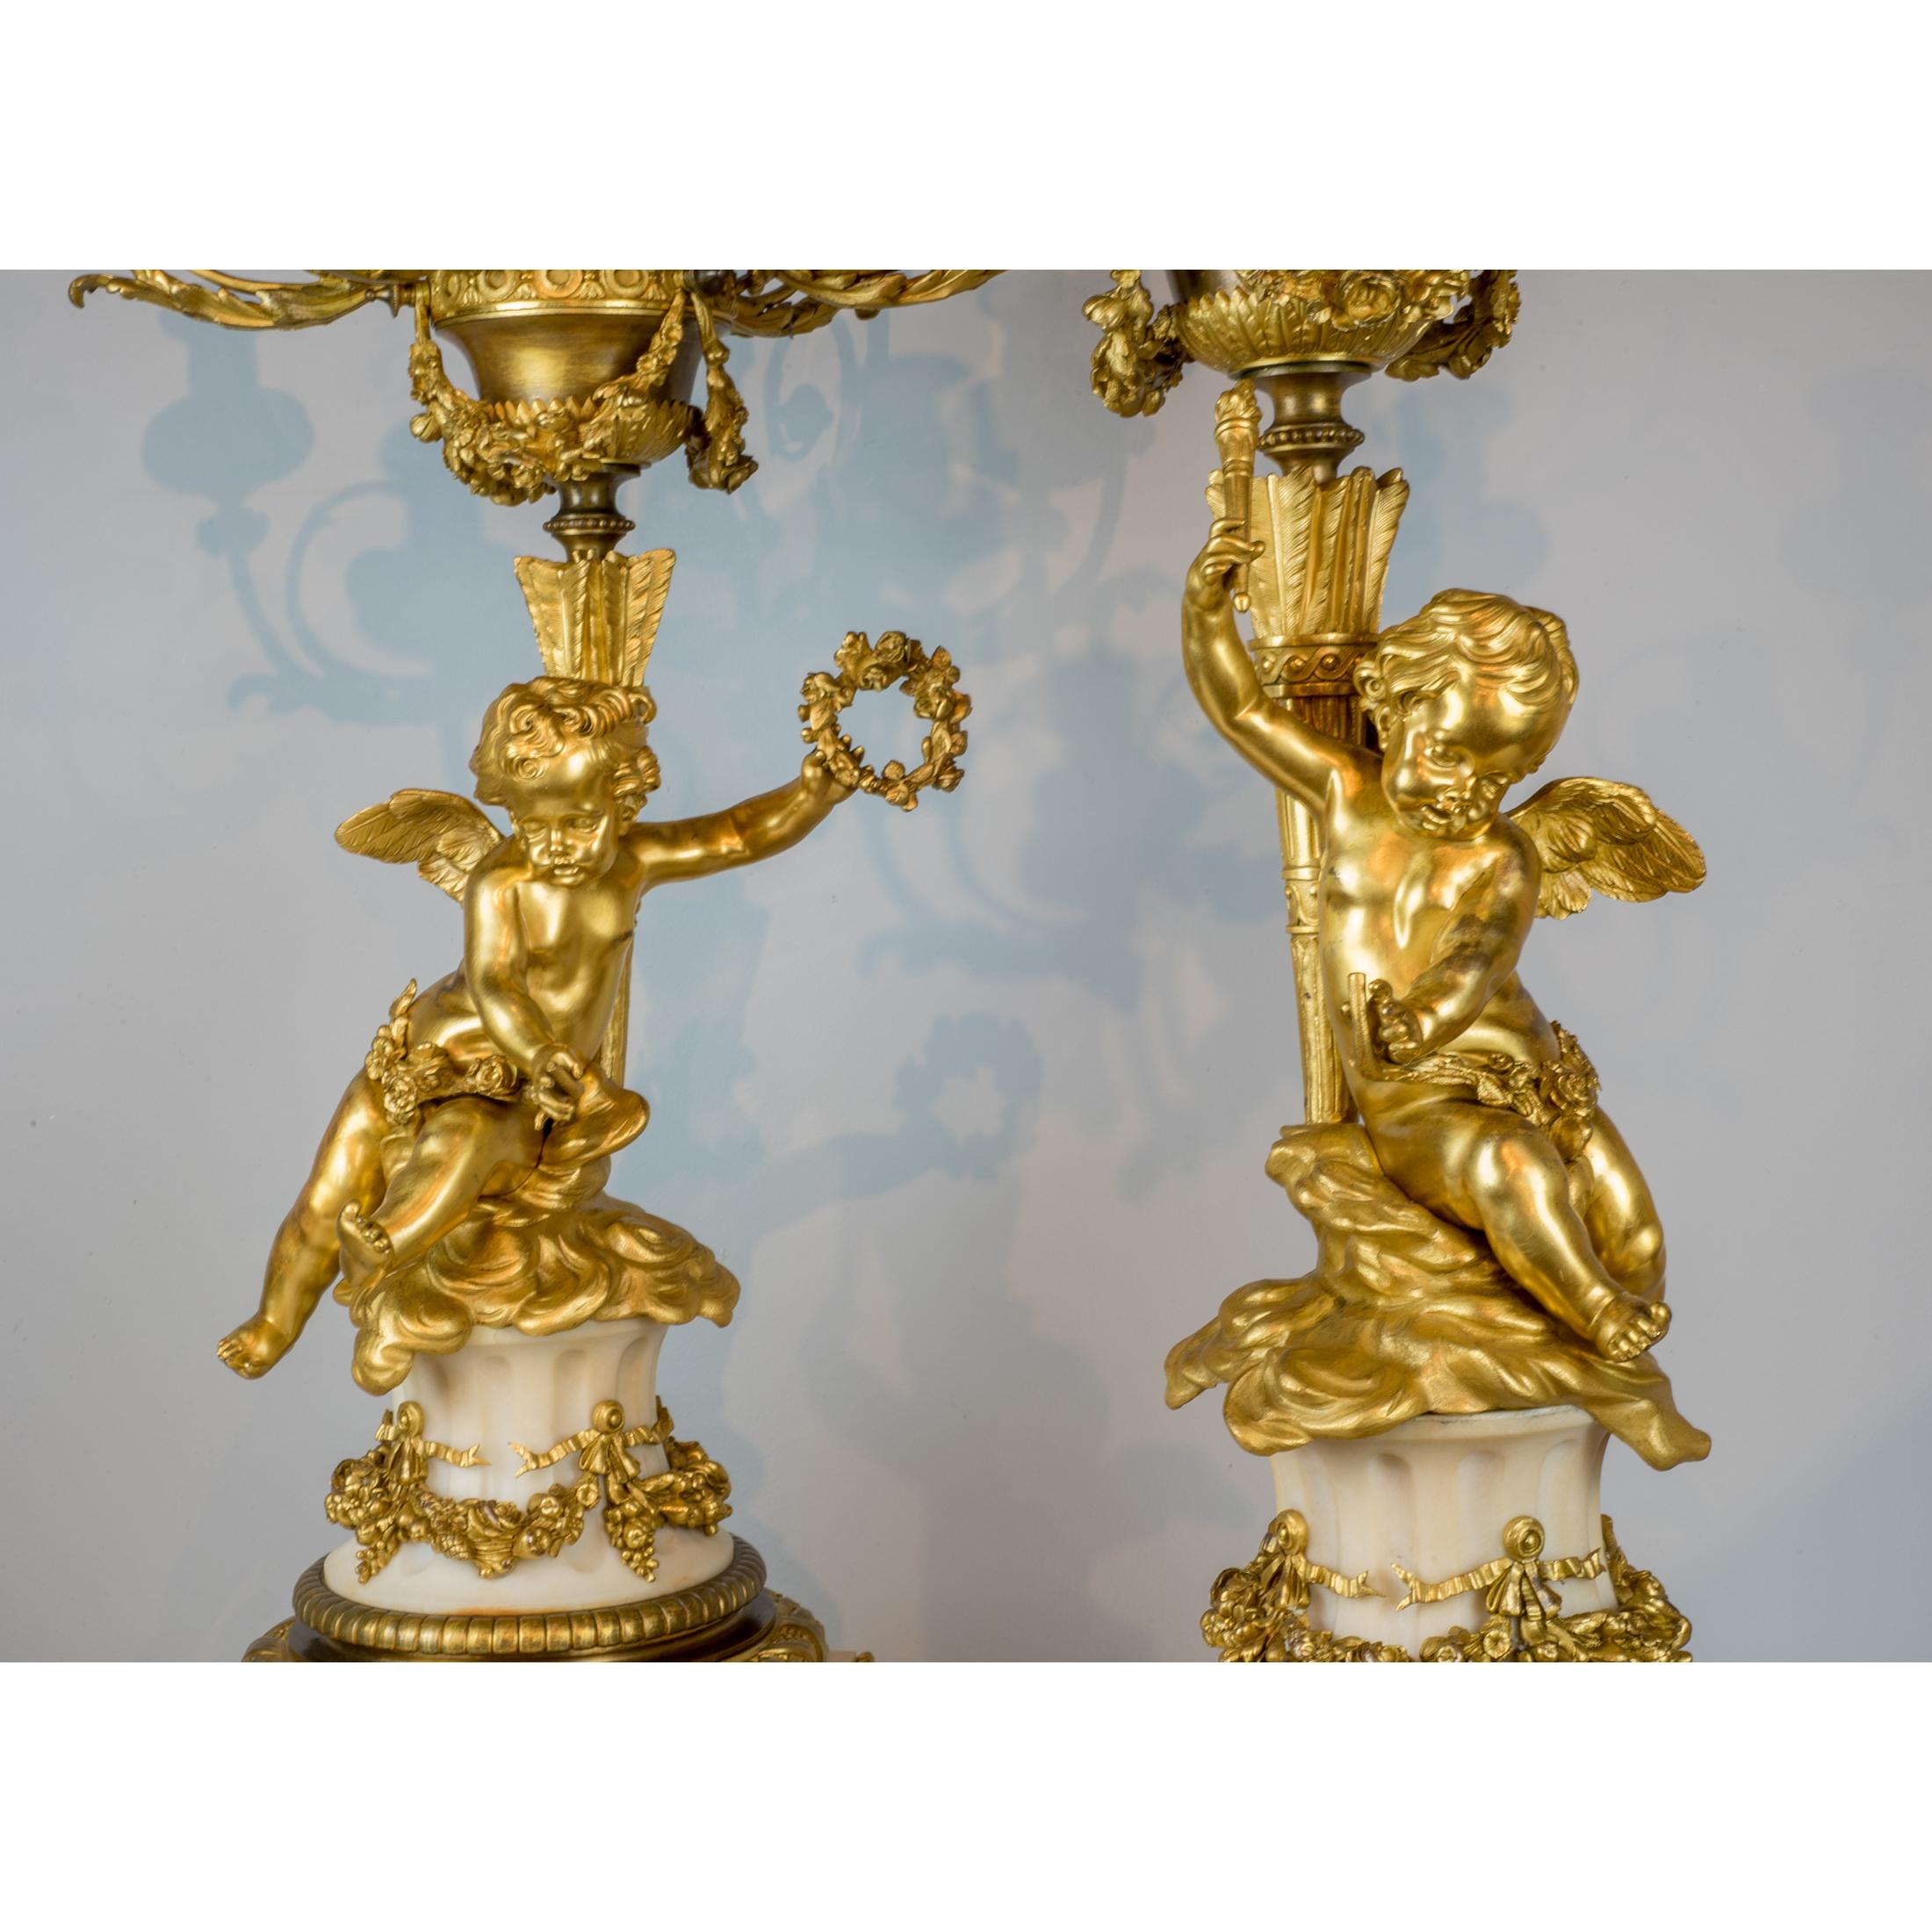 Gilt Fine Quality Pair of Ormolu and White Marble Six-Light Candelabras